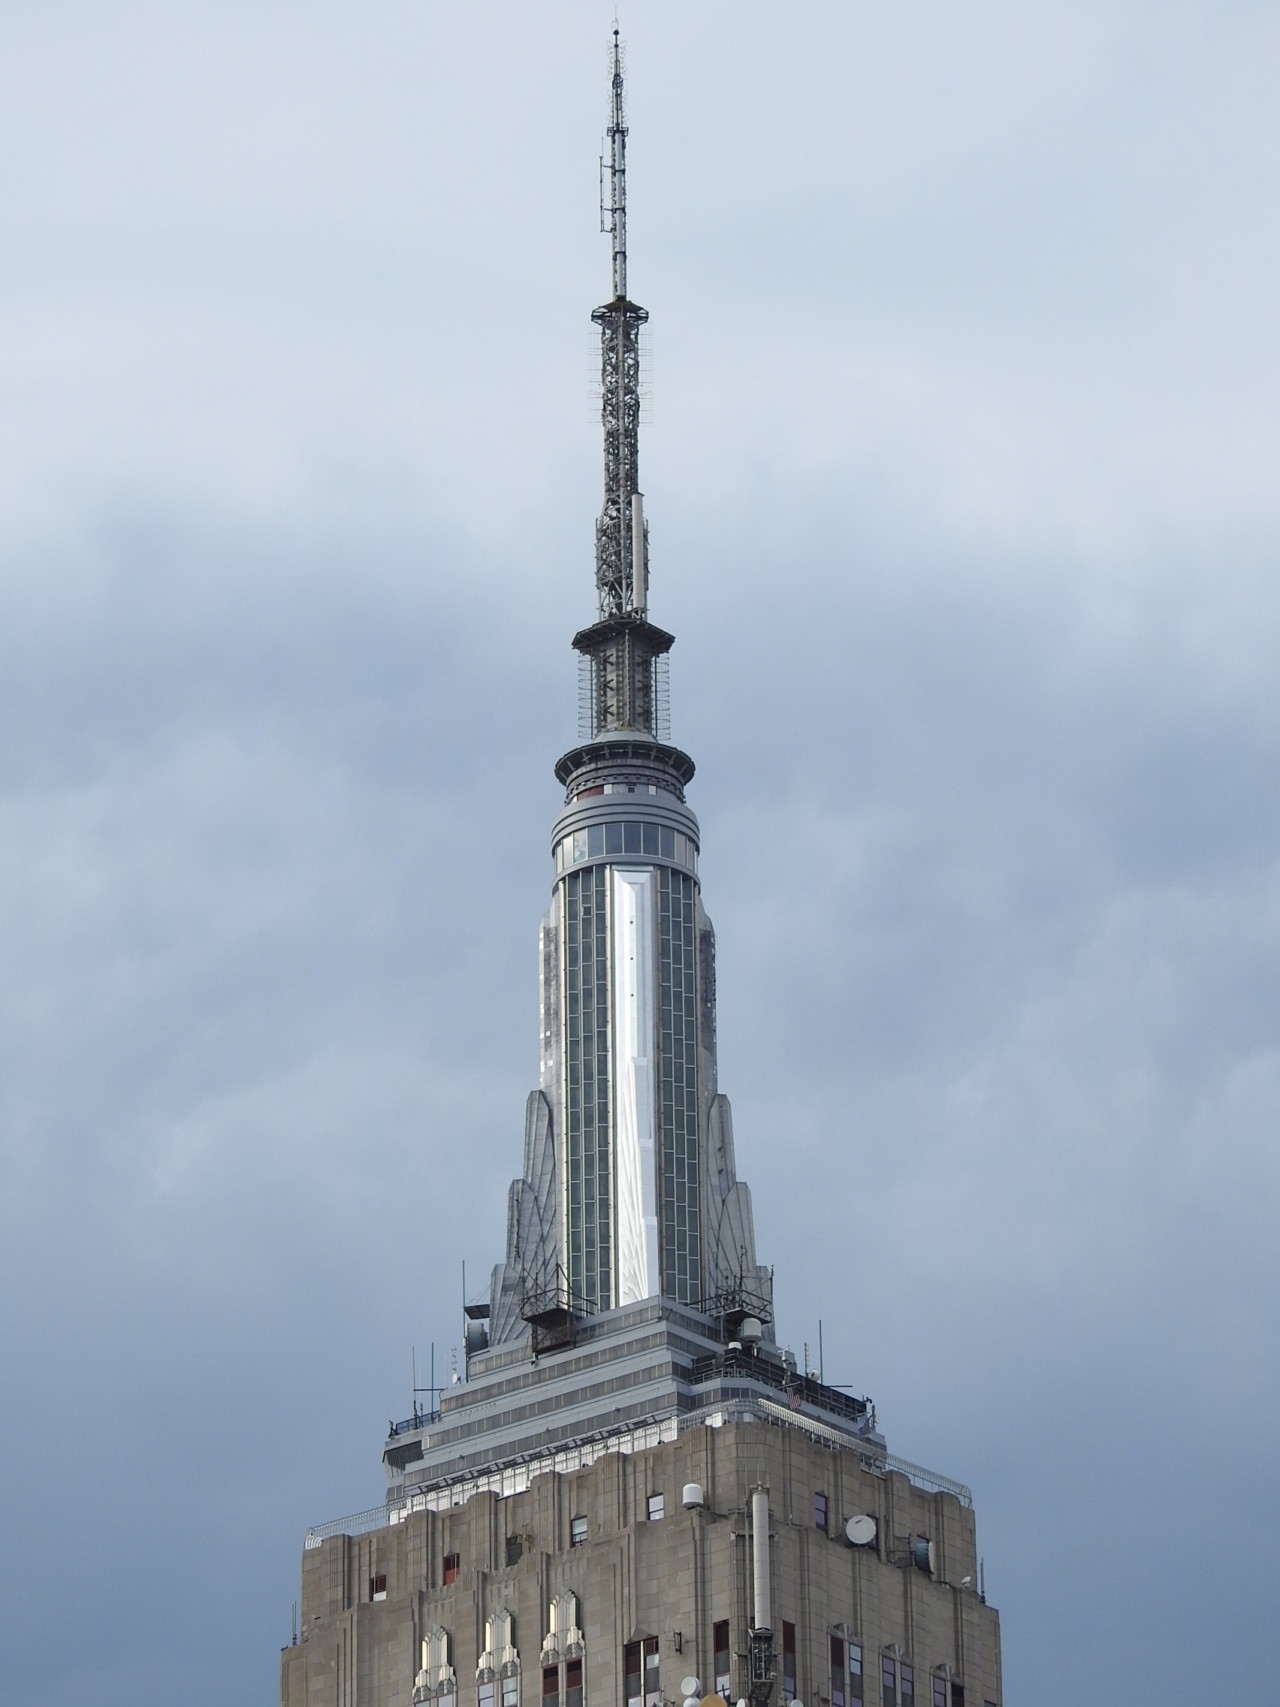 Image of the replacement panels across the spire